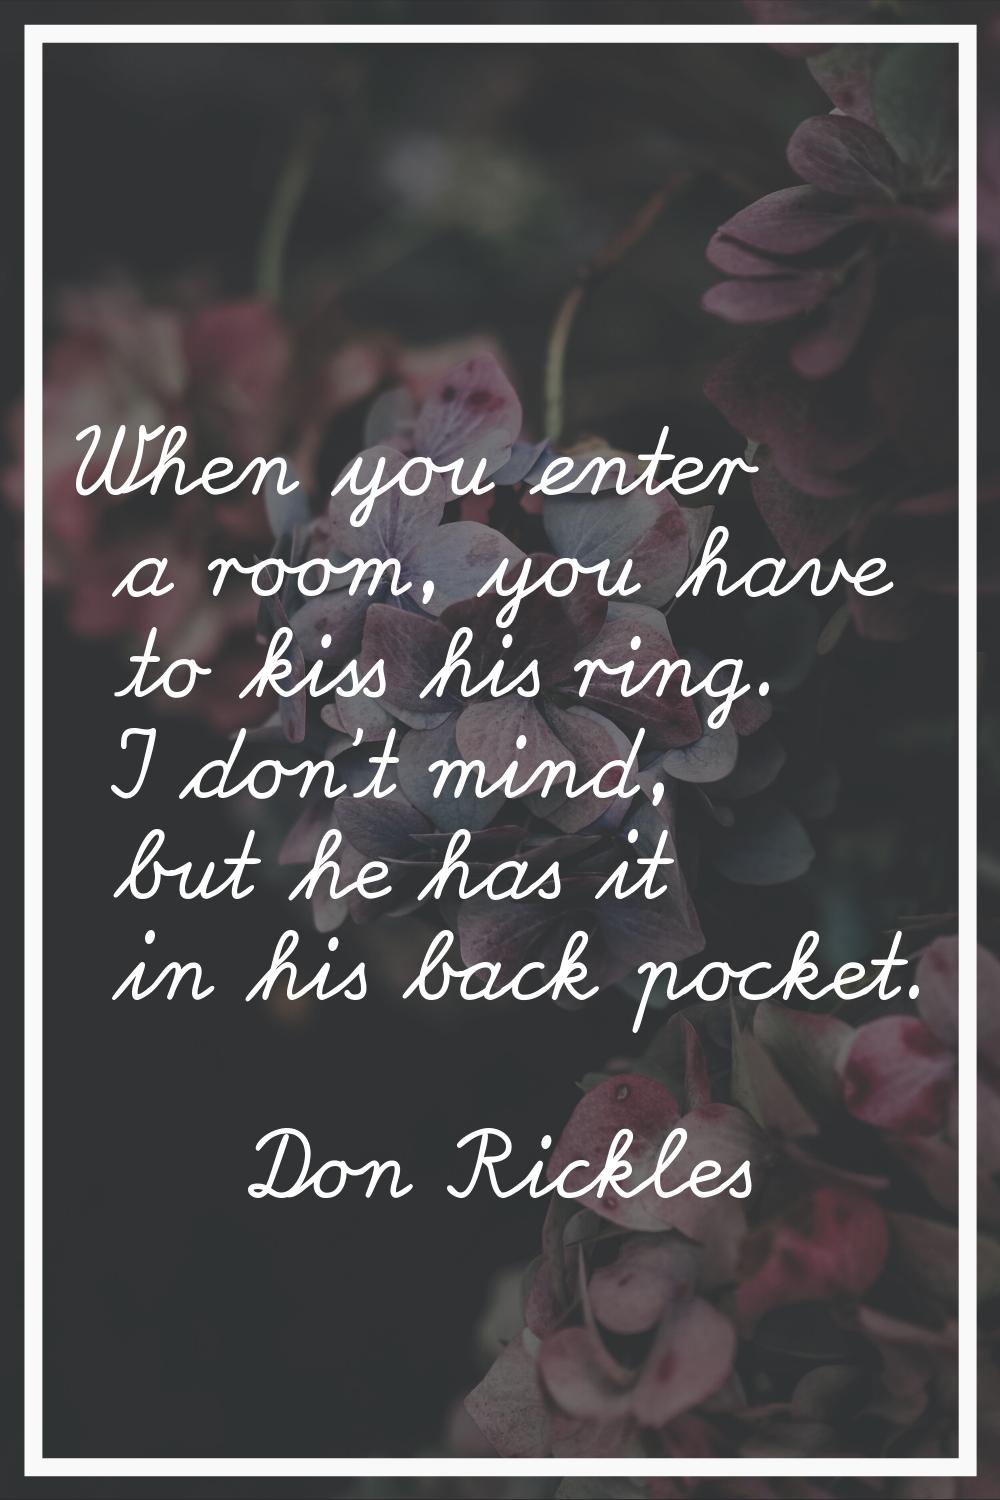 When you enter a room, you have to kiss his ring. I don't mind, but he has it in his back pocket.